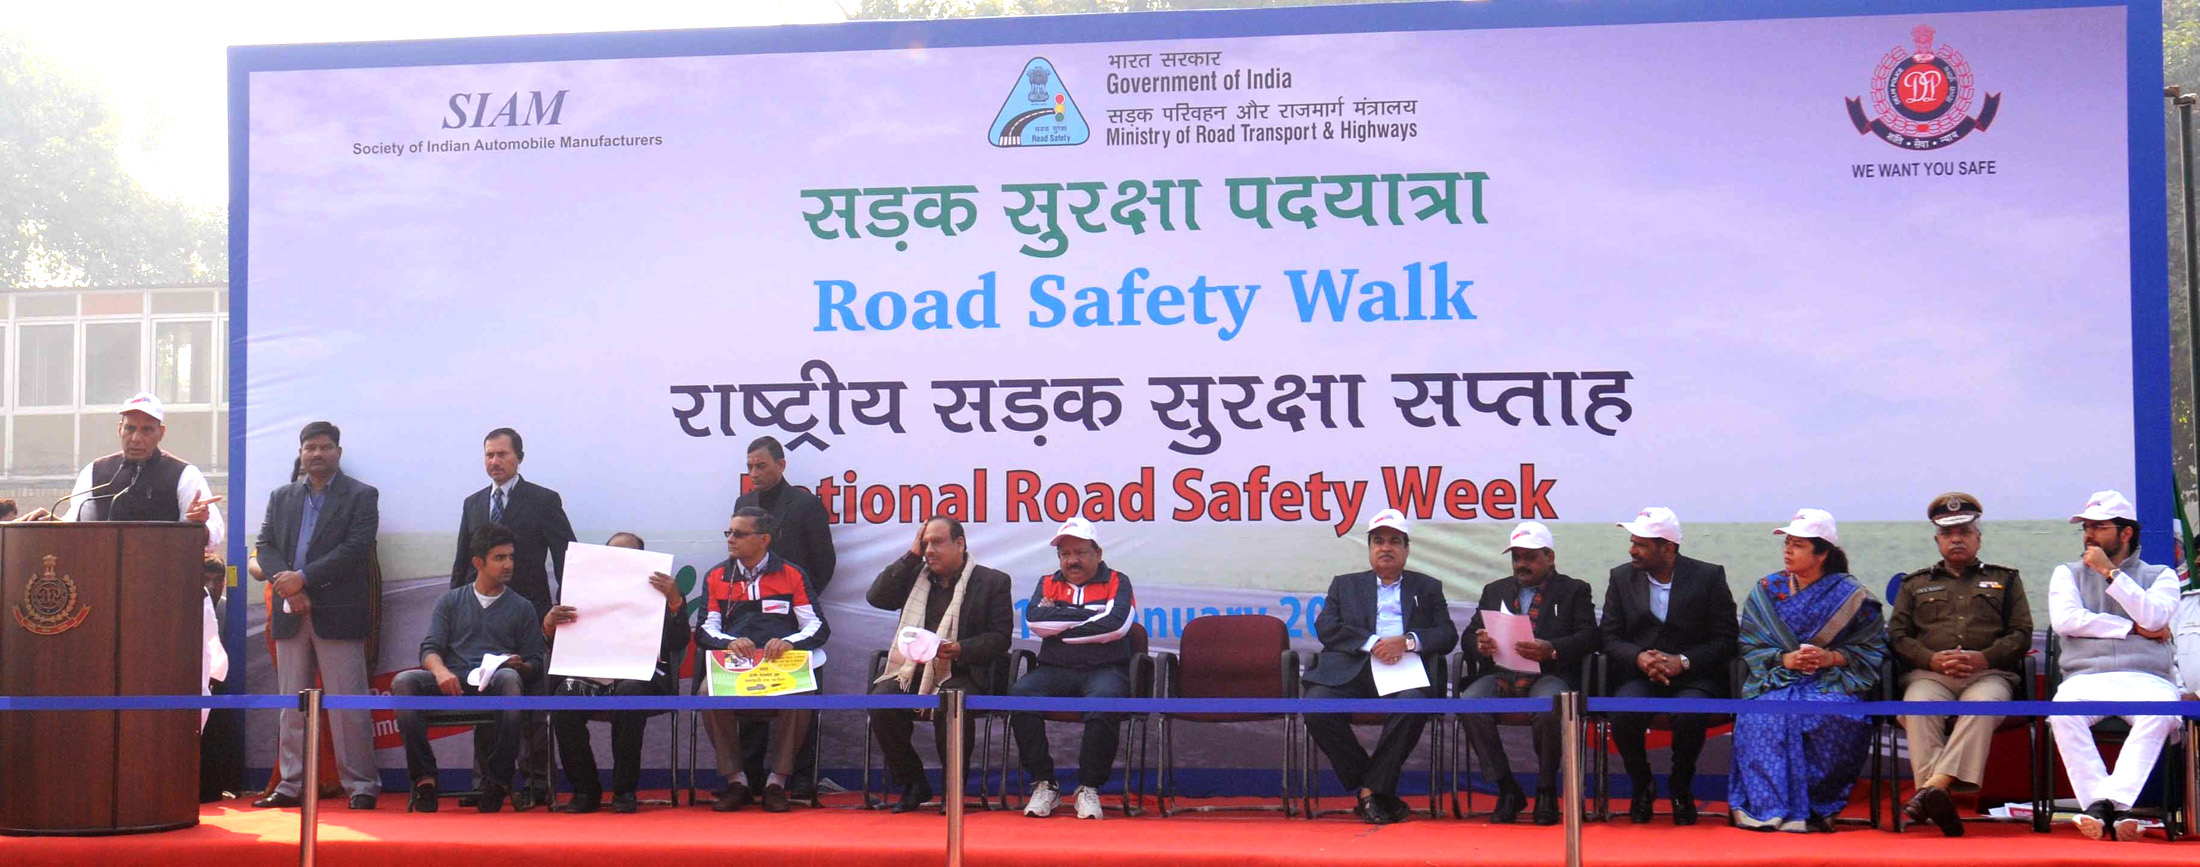 The Union Home Minister, Shri Rajnath Singh addressing at the flag-off ceremony of the Road Safety Walk, in New Delhi on January 11, 2016. 	The Union Minister for Road Transport & Highways and Shipping, Shri Nitin Gadkari, the Union Minister for Science & Technology and Earth Sciences, Dr. Harsh Vardhan and other dignitaries are also seen.